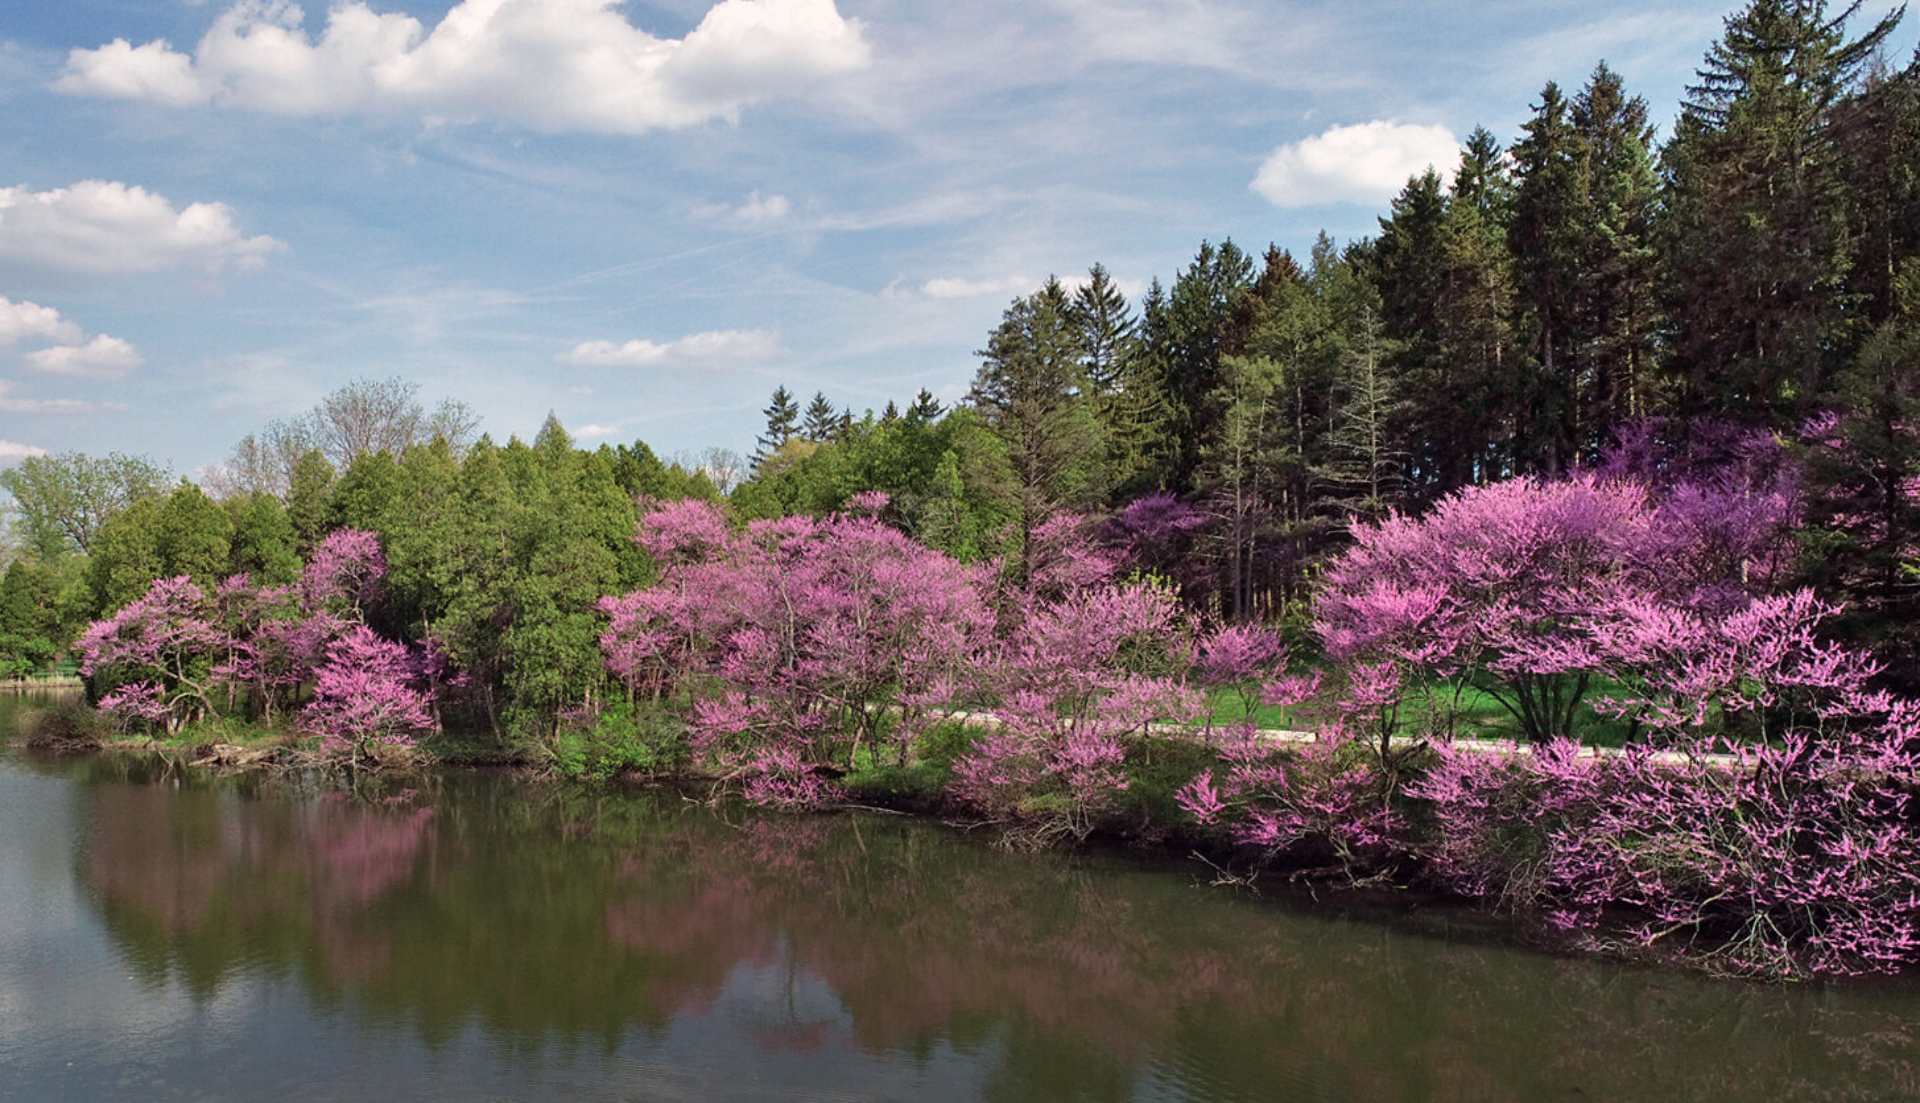 Photograph of redbud trees on the banks of Lake Marmo on the West Side of The Morton Arboretum